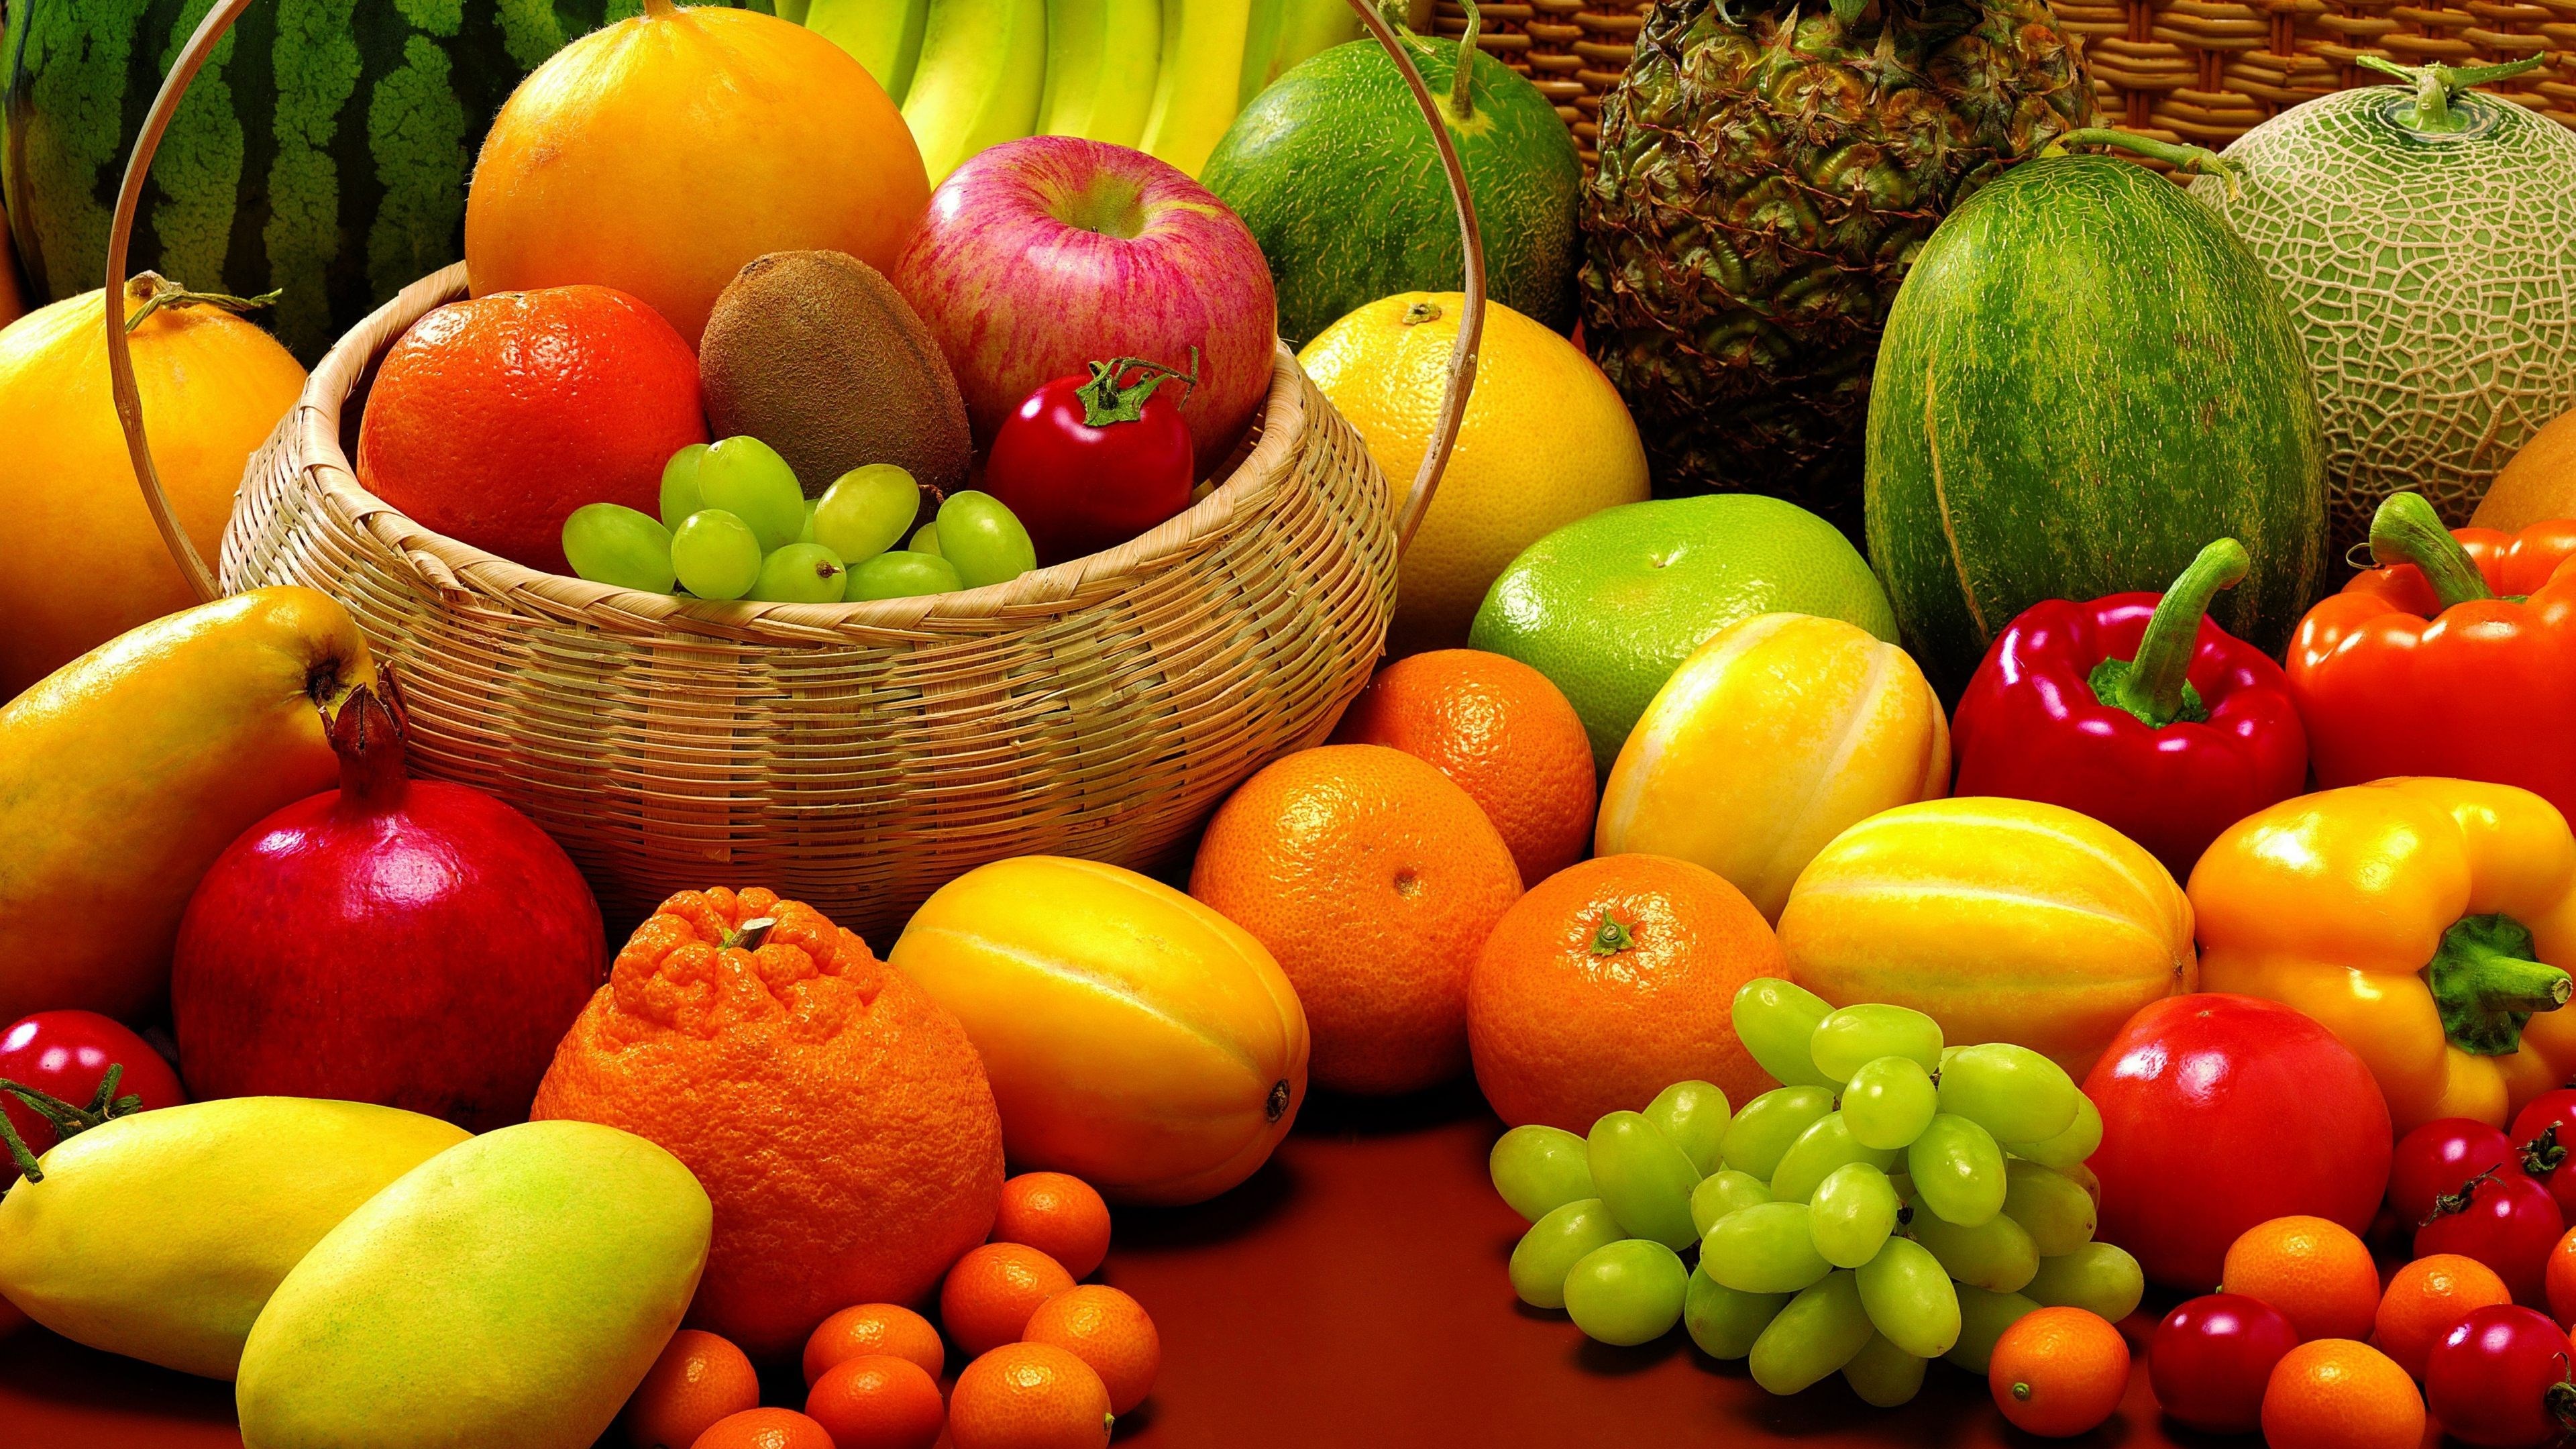 Fruit And Vegetables Ultra HD 4k Wallpaper High Quality